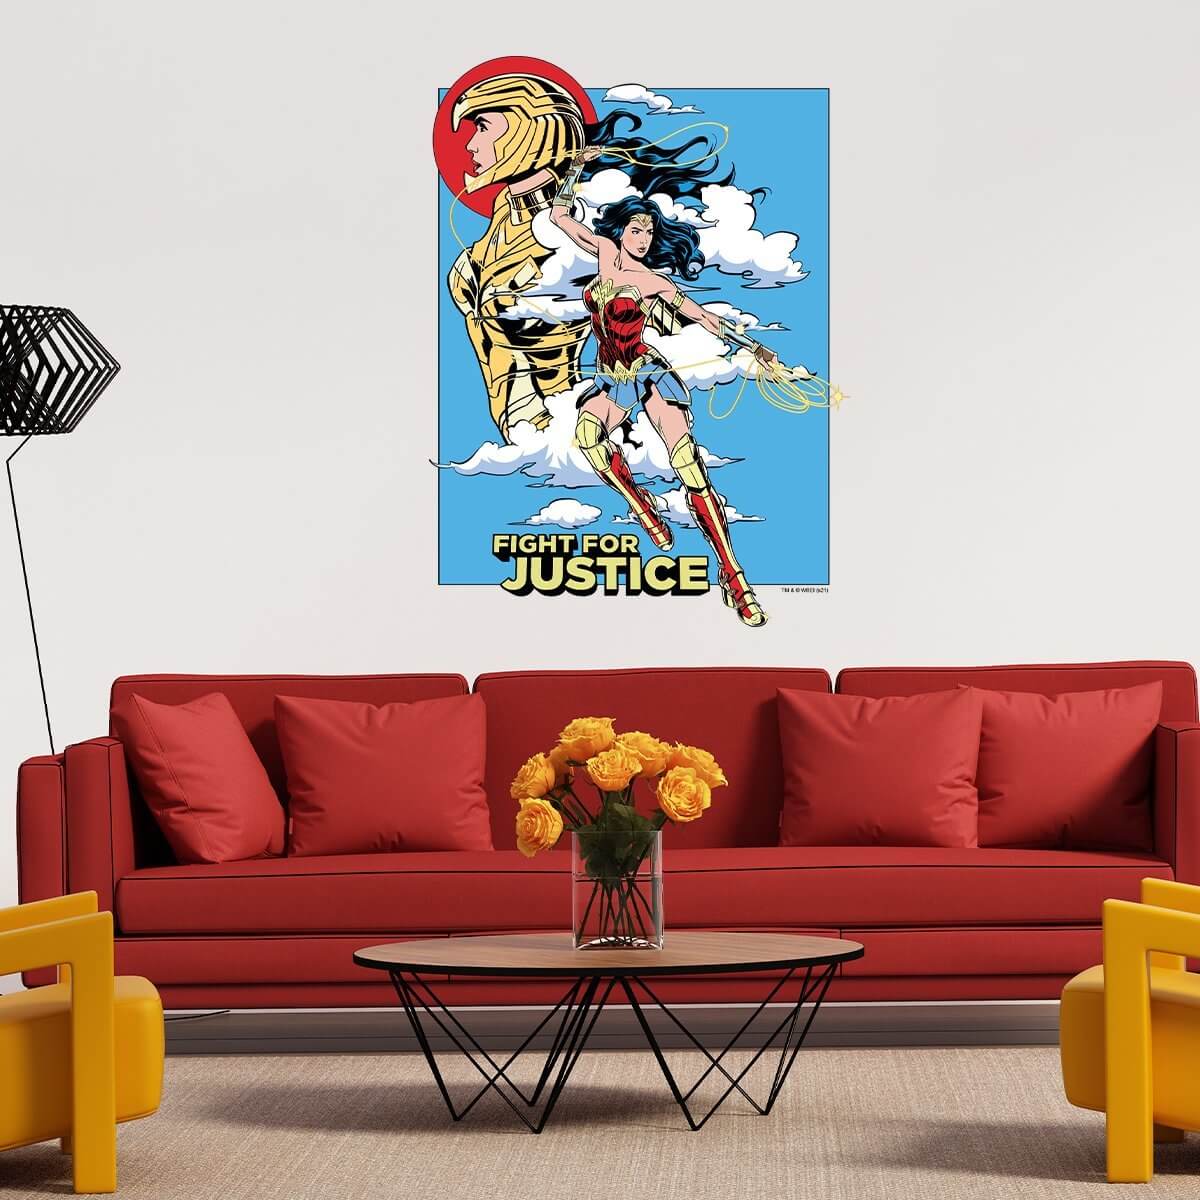 Kismet Decals WW84 Fight for Justice Licensed Wall Sticker - Easy DIY Wonder Woman 1984 Home & Room Decor Comic Art - Kismet Decals